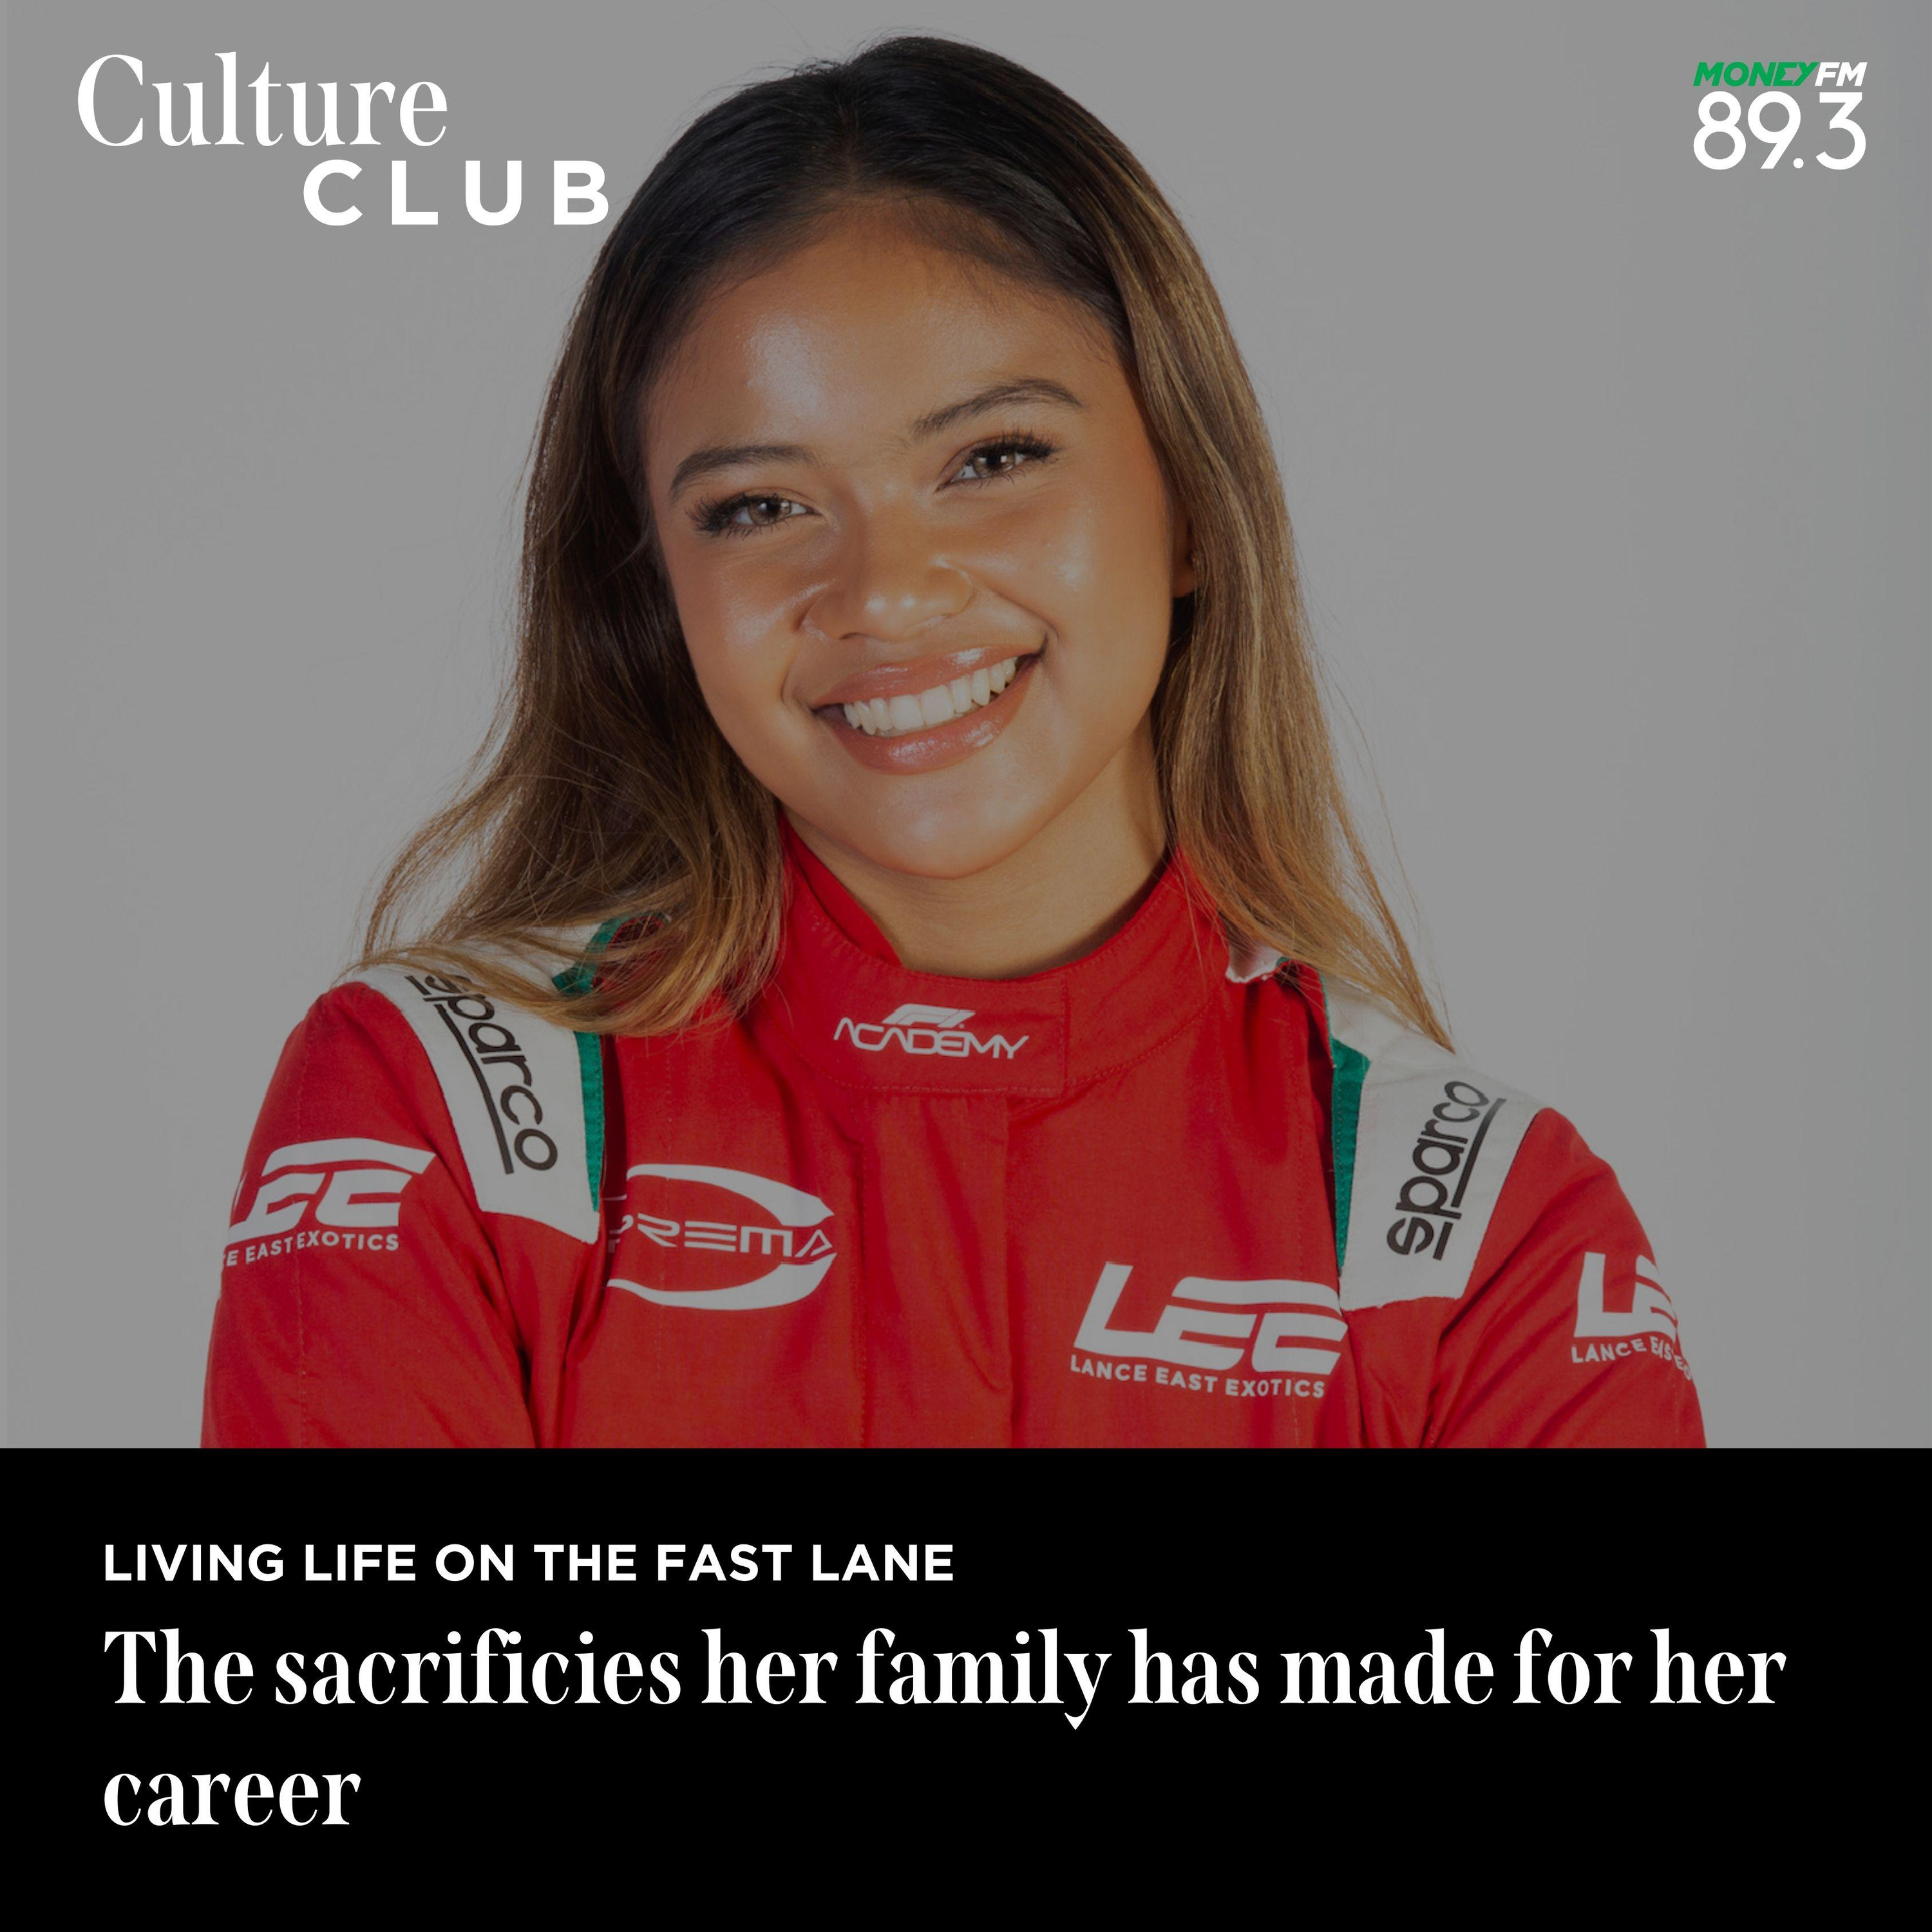 Culture Club: F1 Academy driver talks life on the fast lane